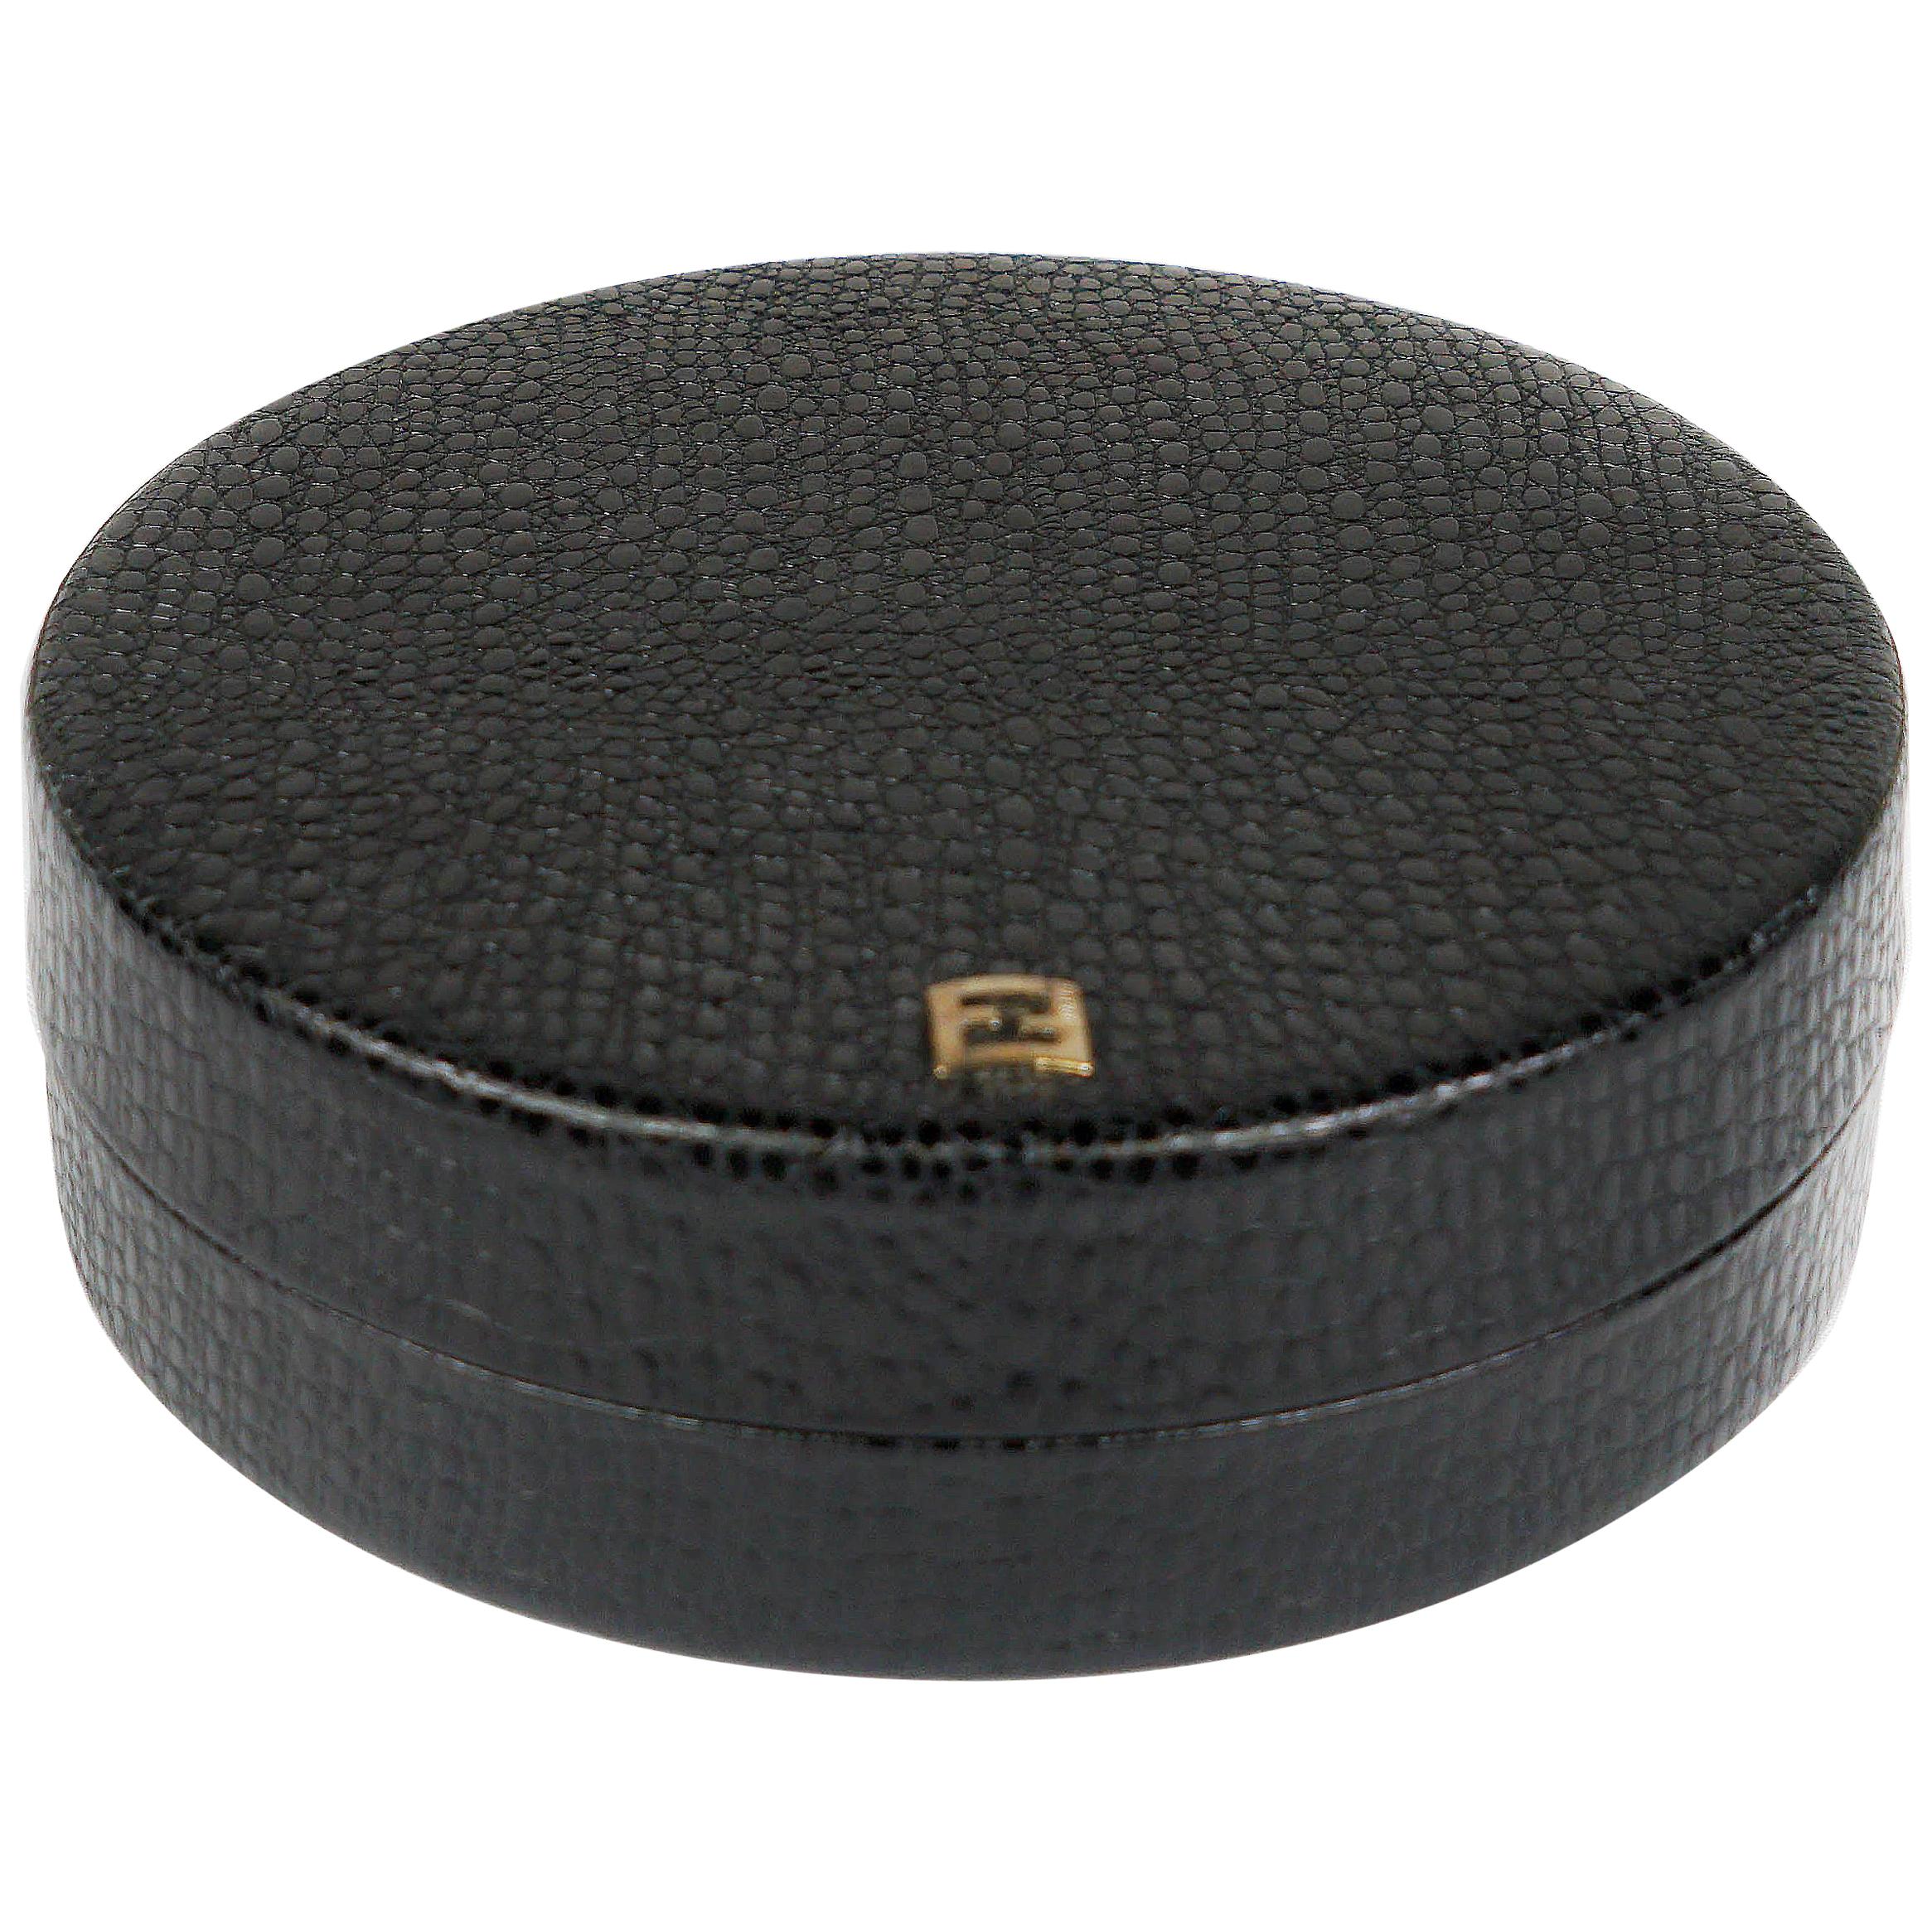 Leather Covered Round Box